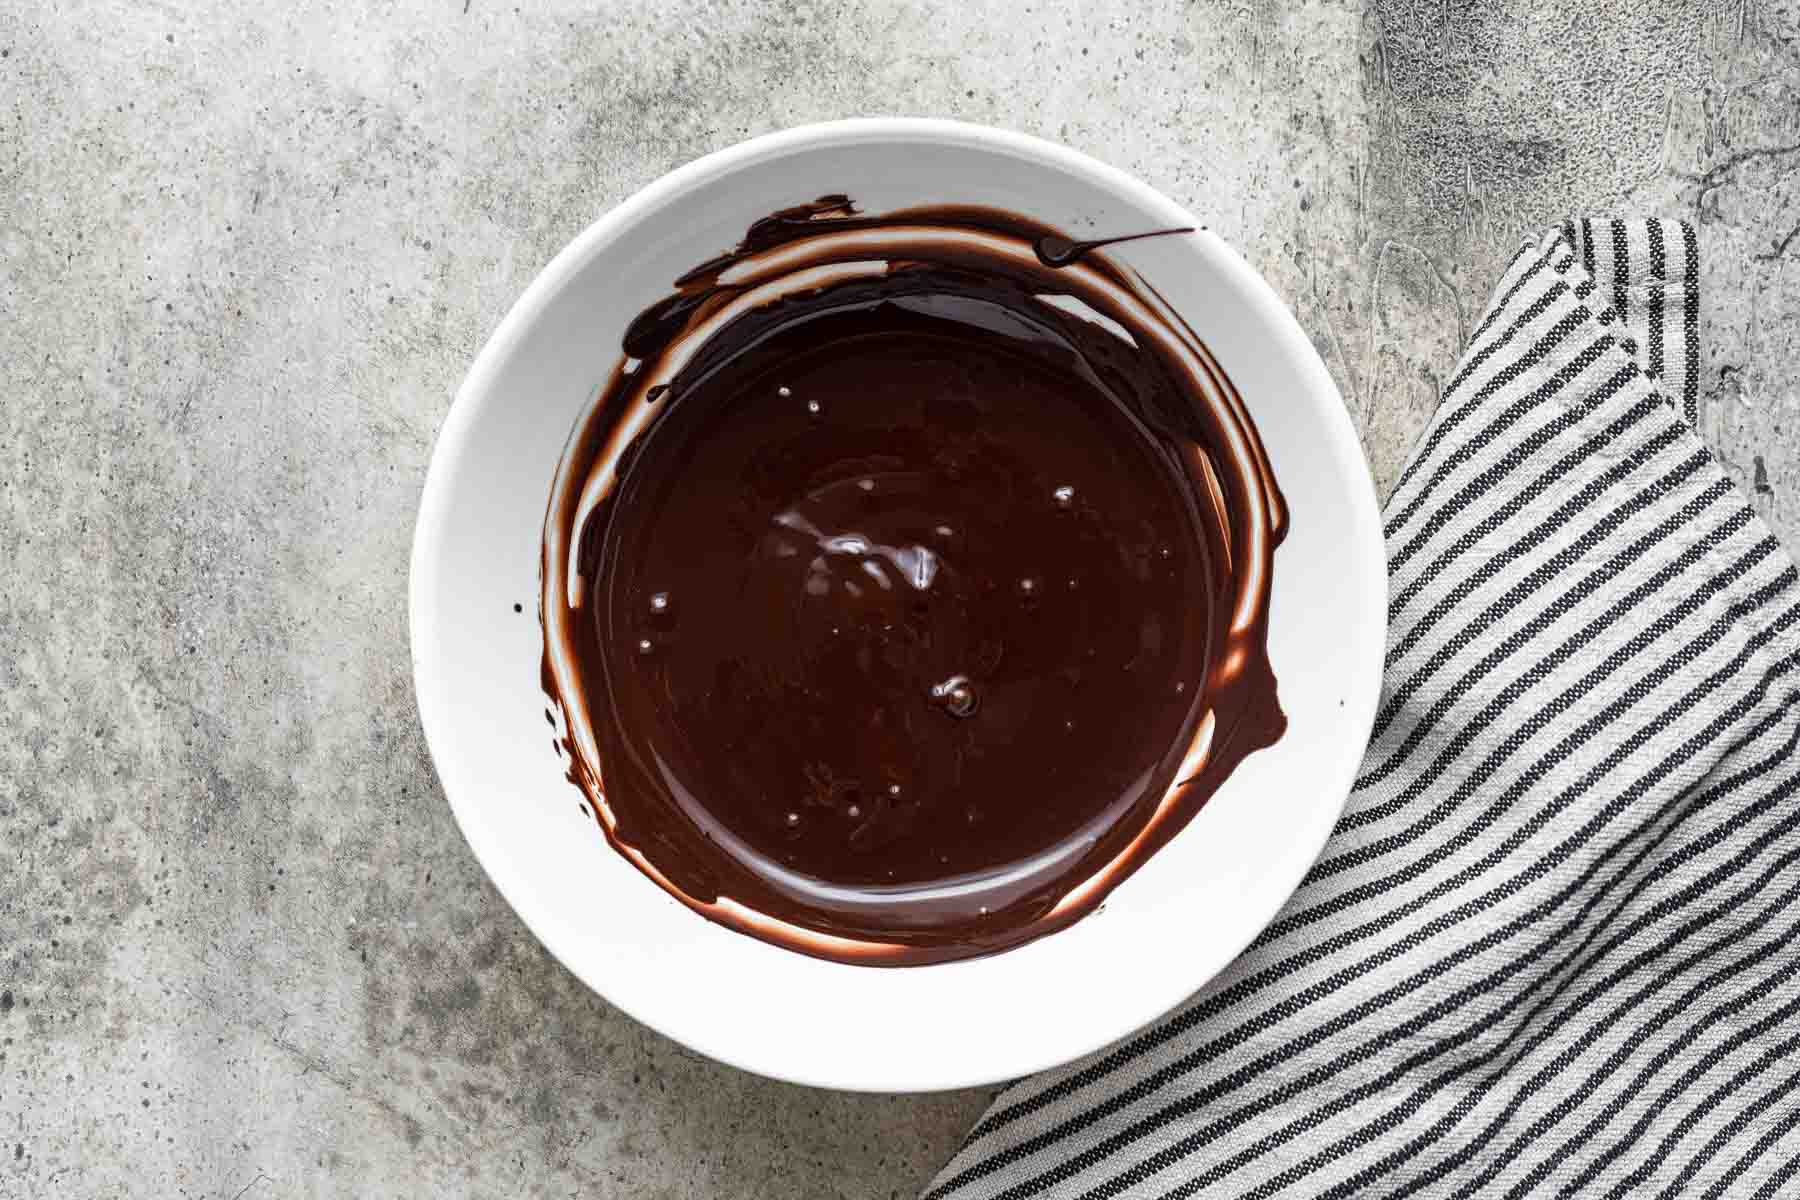 Melted chocolate in small white bowl.